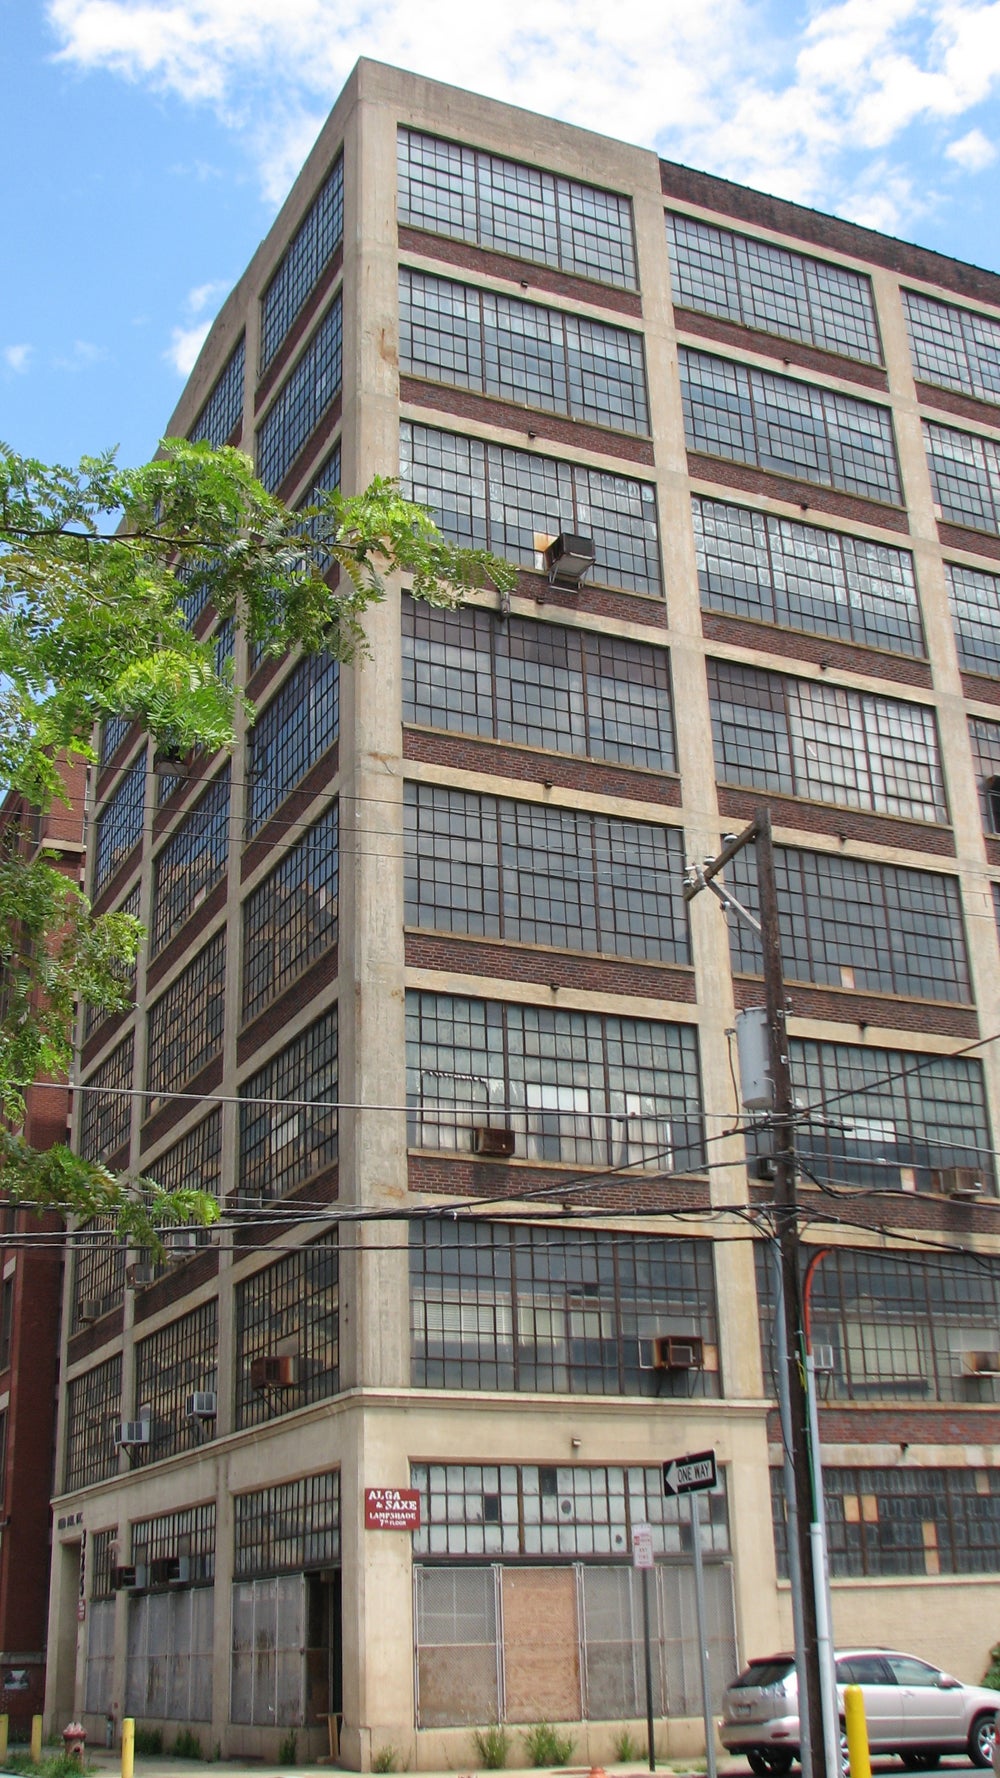 The Heid Building, designed by J. Franklin Stuckert, exemplifies 1920s concrete and steel industrial architecture. 